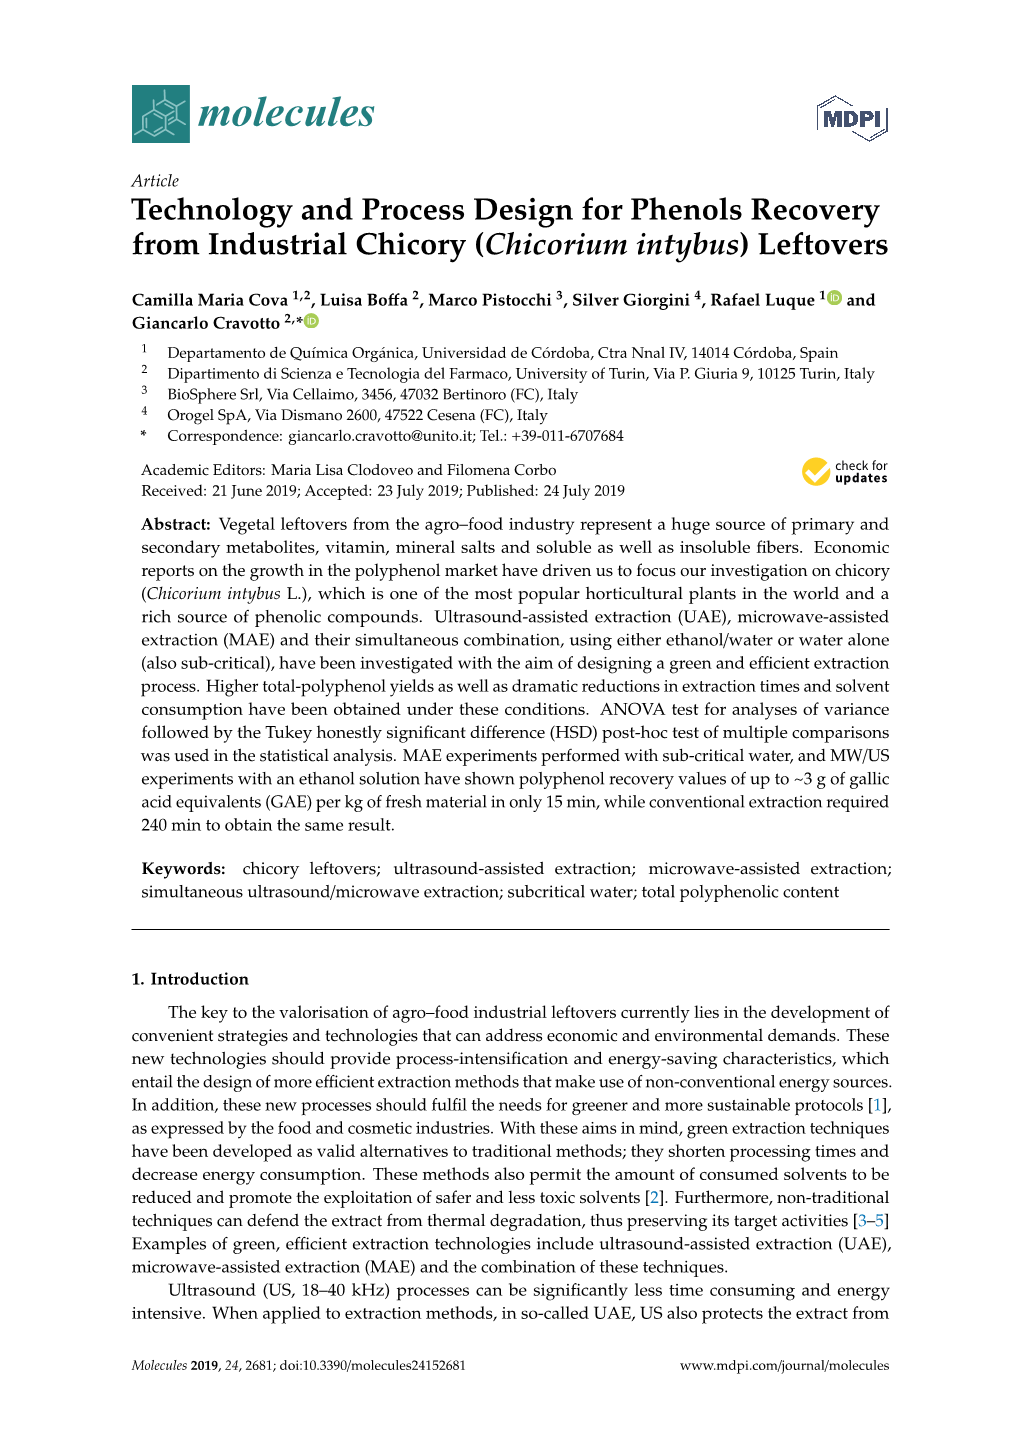 Technology and Process Design for Phenols Recovery from Industrial Chicory (Chicorium Intybus) Leftovers